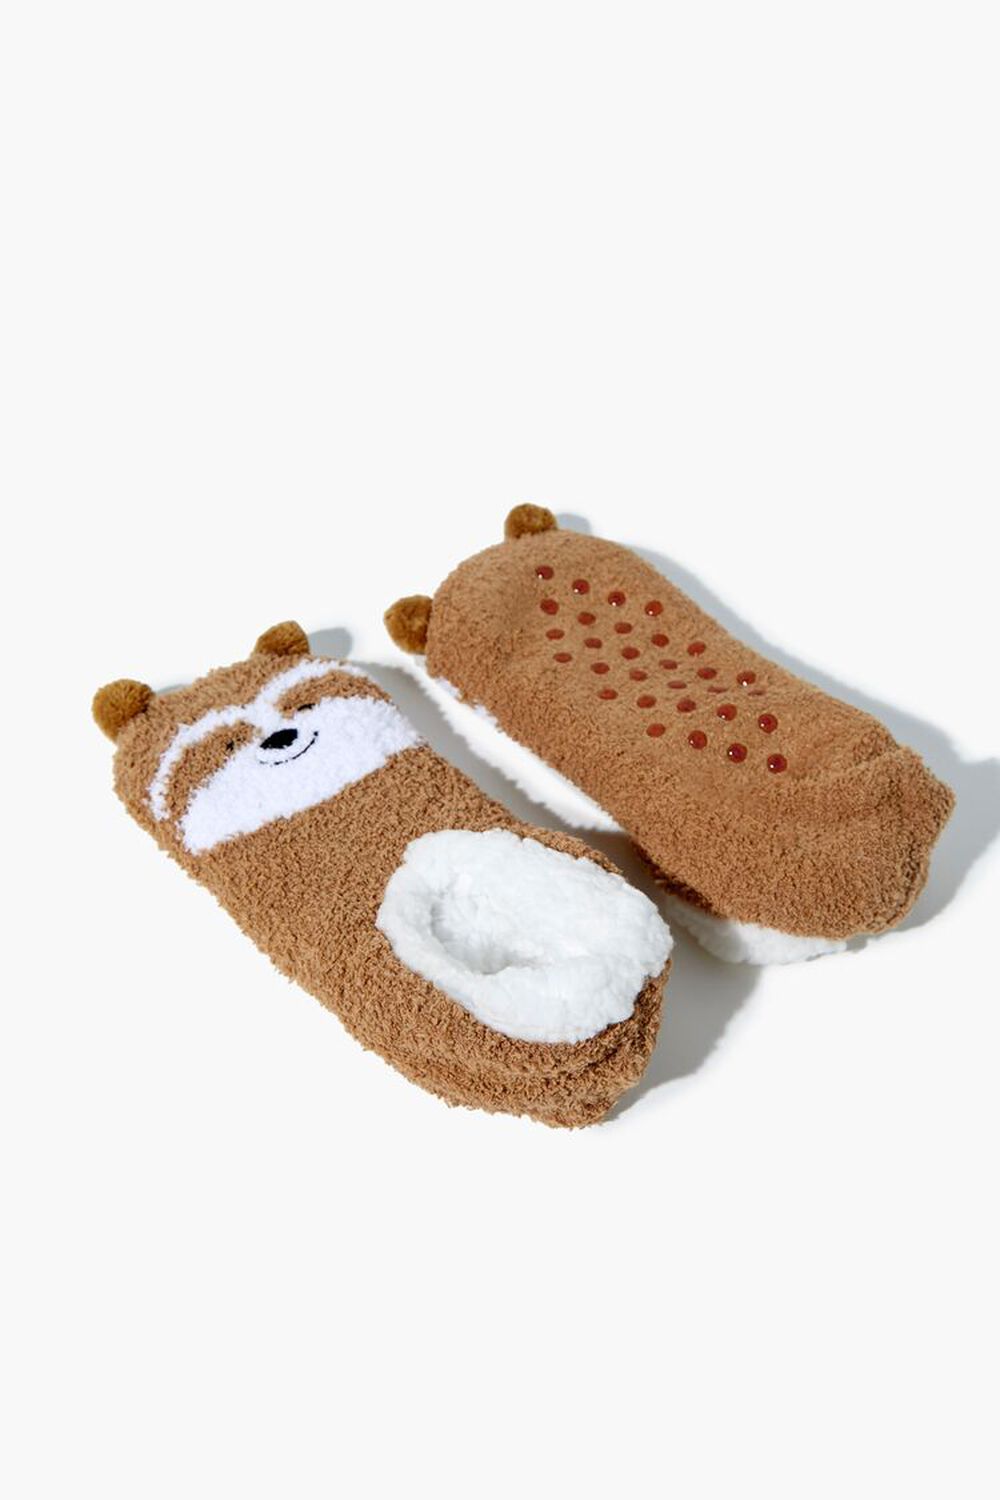 BROWN/MULTI Red Panda House Slippers, image 2